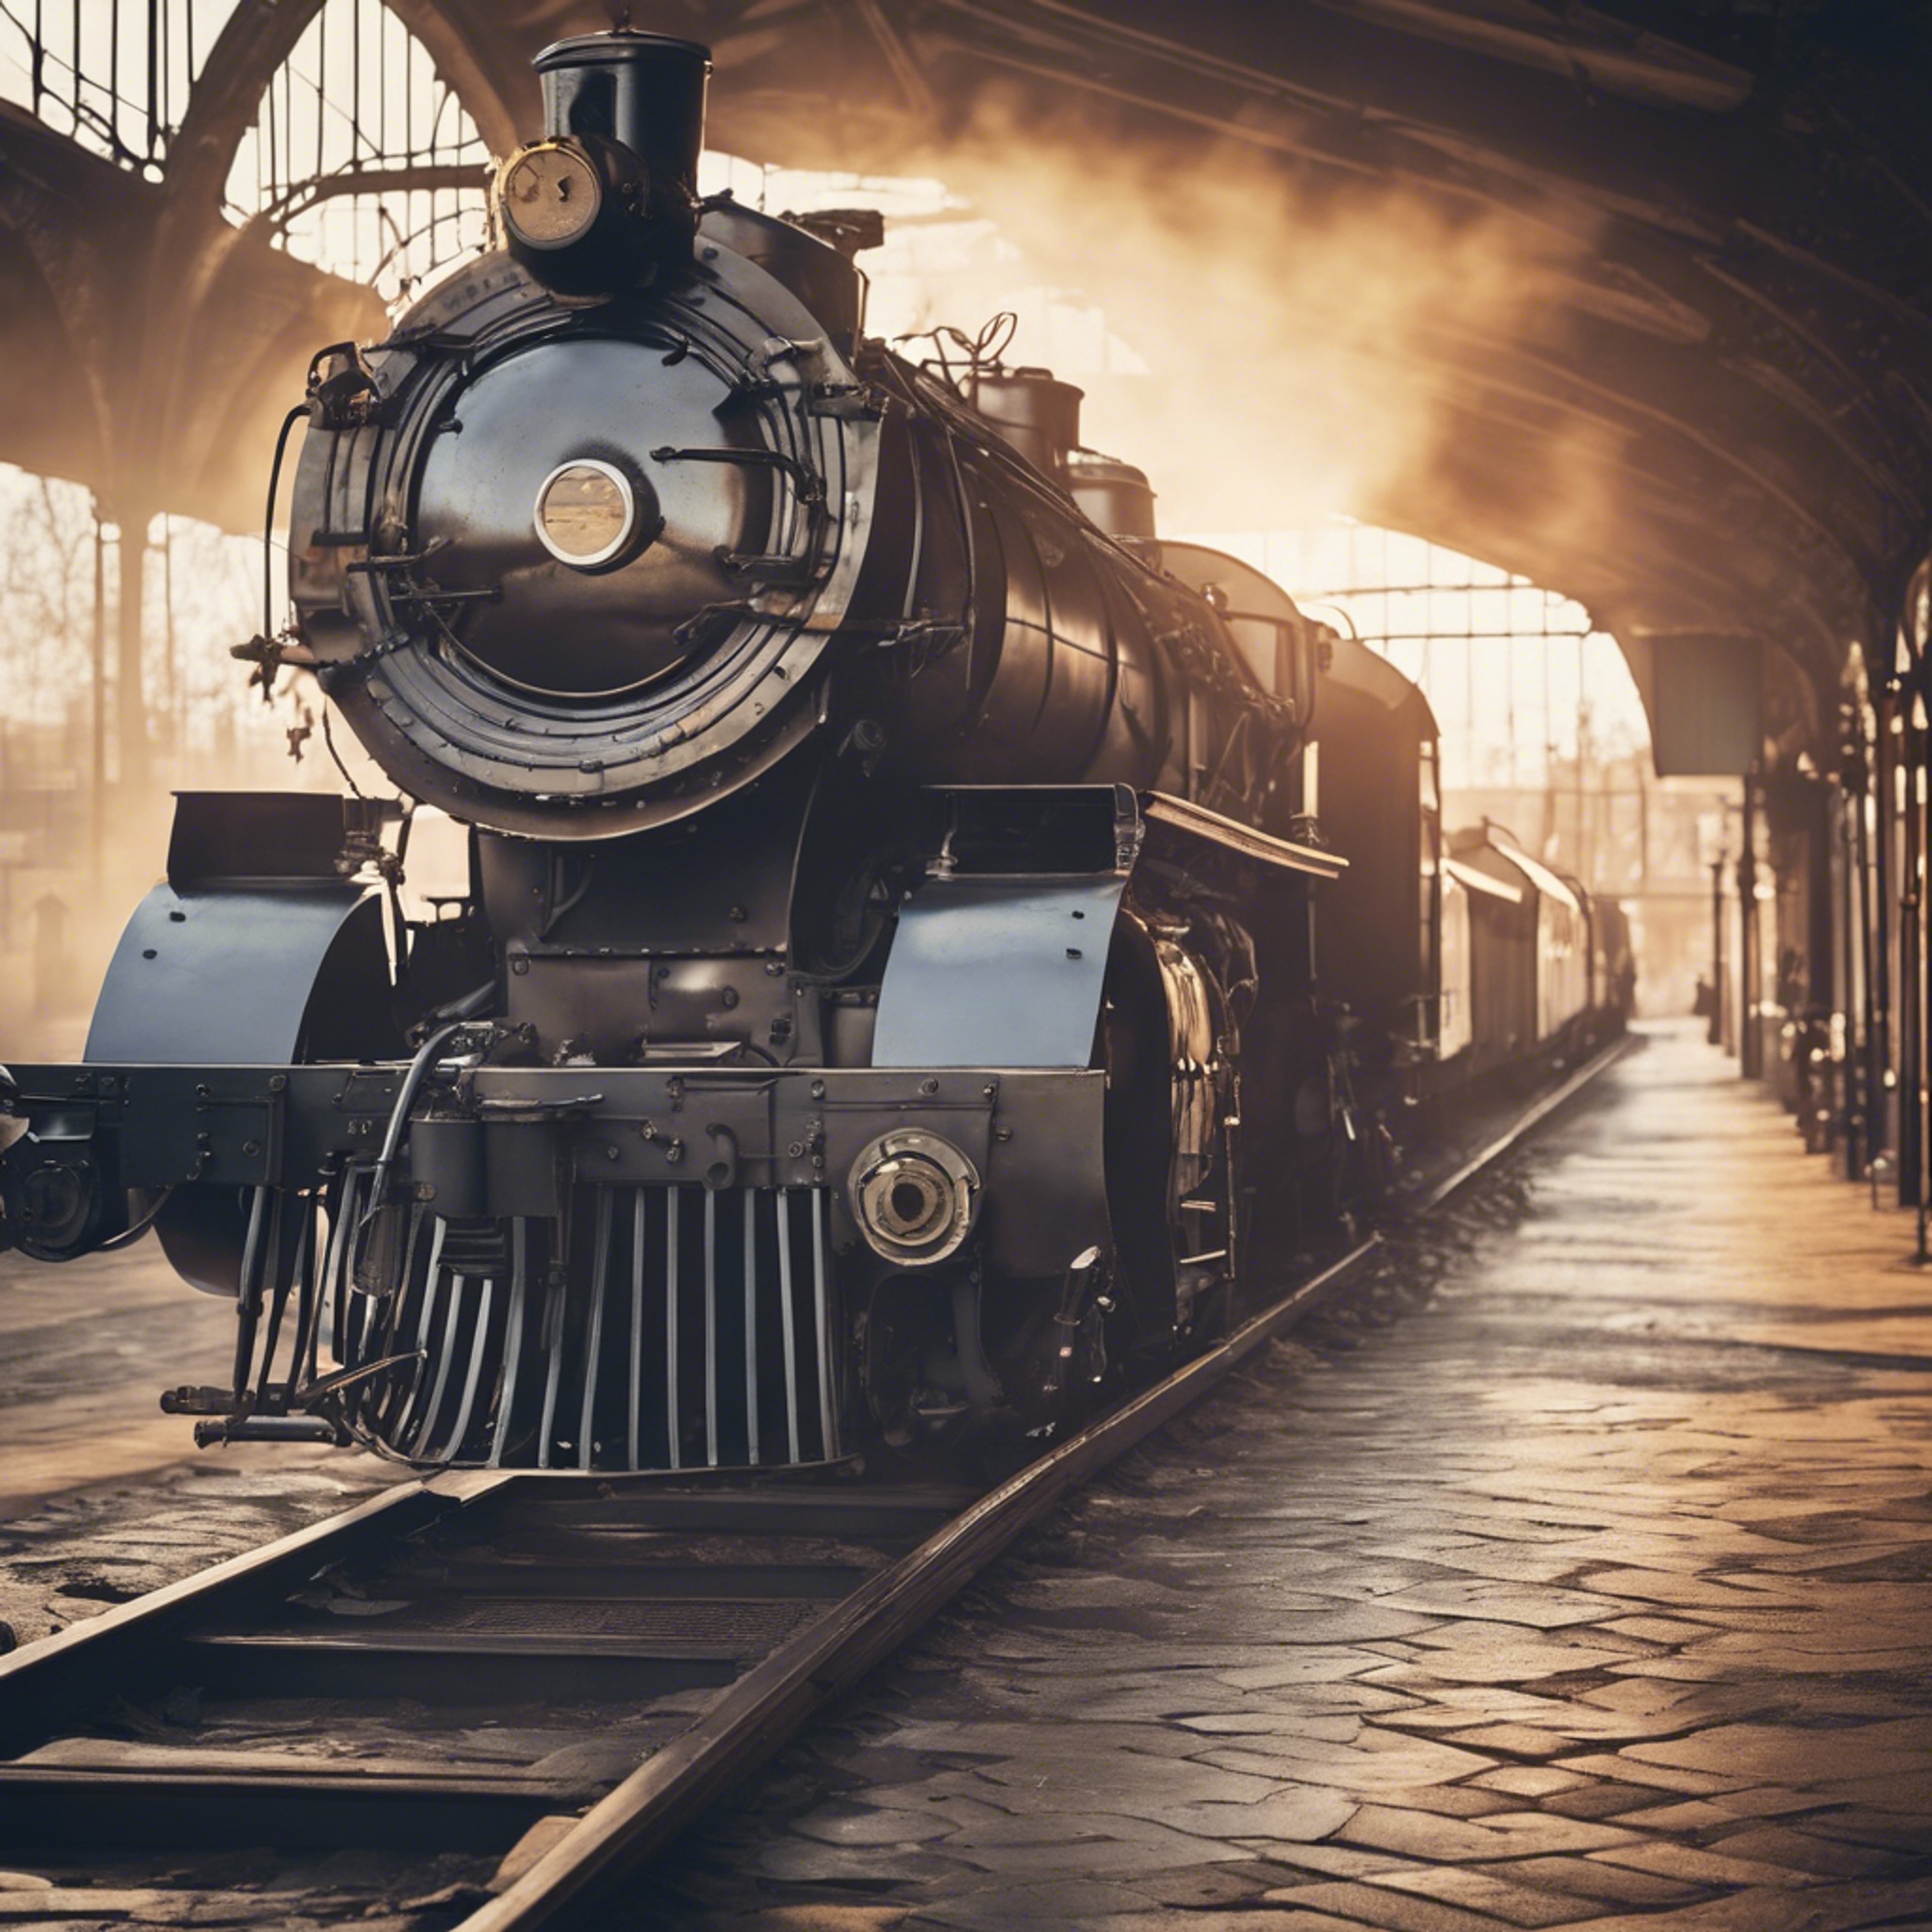 Vintage train station at dawn with an antique locomotive emitting steam. Wallpaper[450823d5e7f445219bb2]